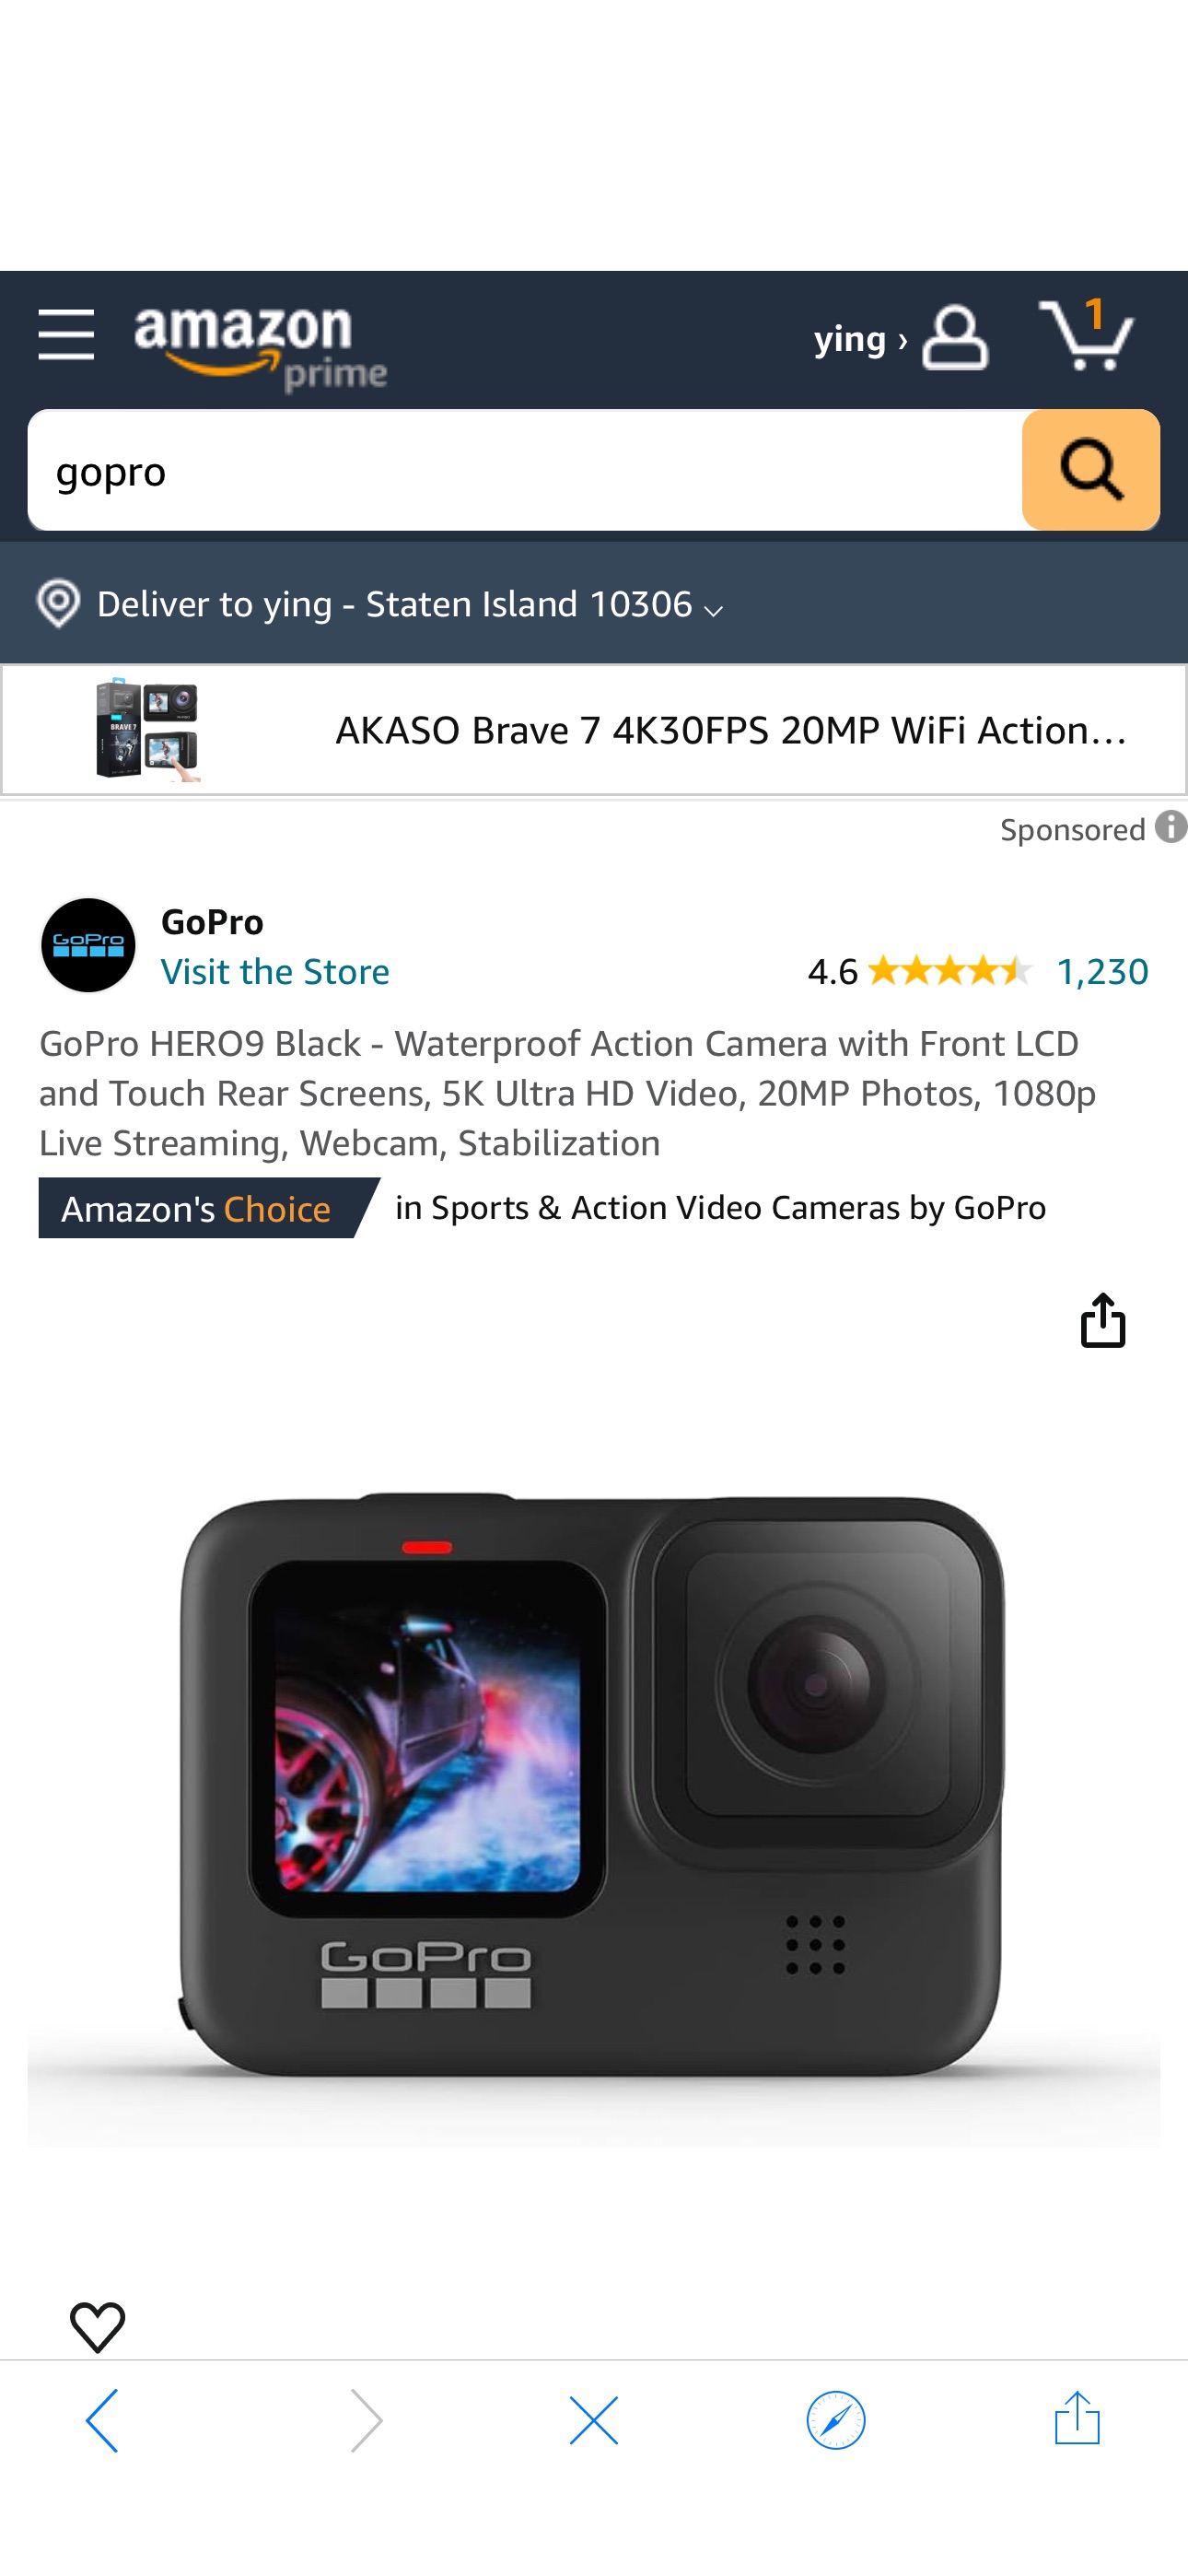 Amazon.com : GoPro HERO9 Black - Waterproof Action Camera with Front LCD and Touch Rear Screens, 5K Ultra HD Video, 20MP Photos, 1080p Live Streaming, Webcam, Stabilization : Electronics